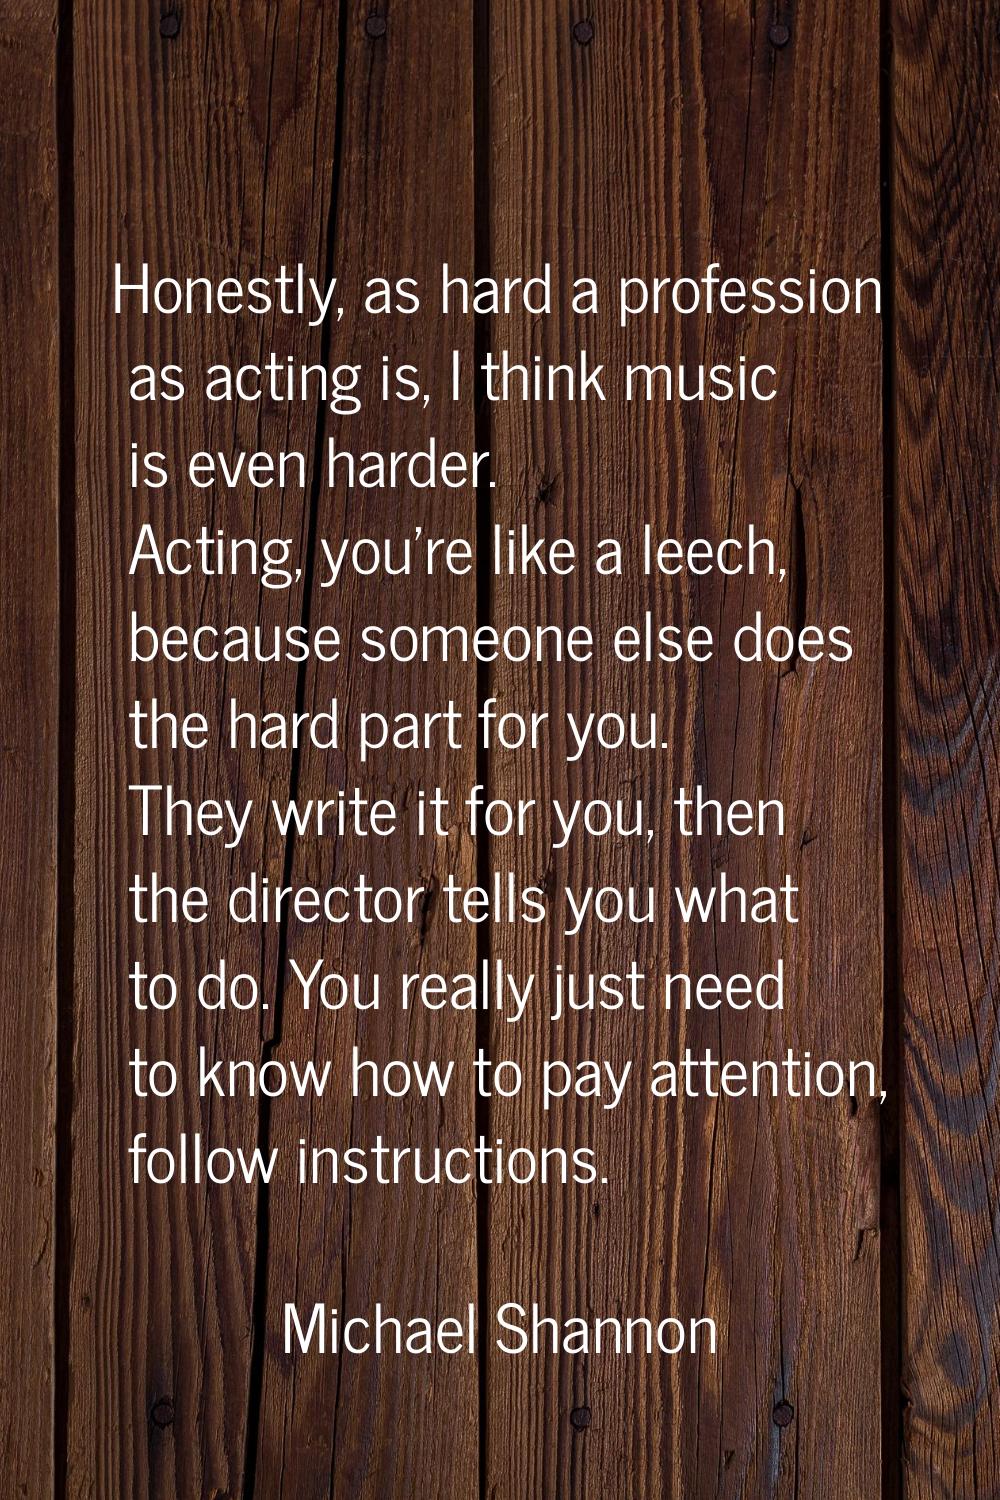 Honestly, as hard a profession as acting is, I think music is even harder. Acting, you're like a le